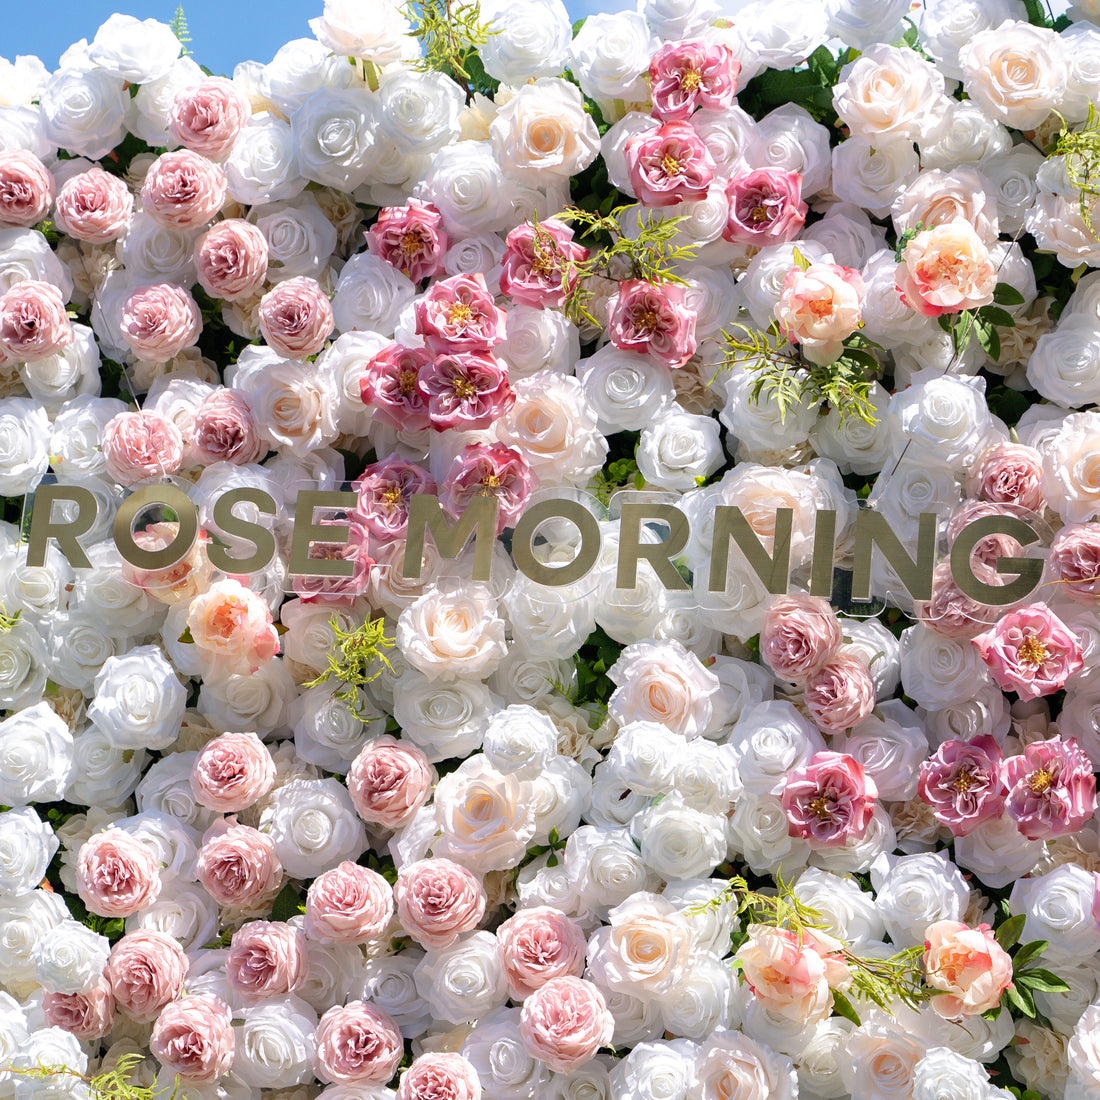 Jules：5D Fabric Artificial rolling up curtain flower wall (Ready to ship) Rose Morning